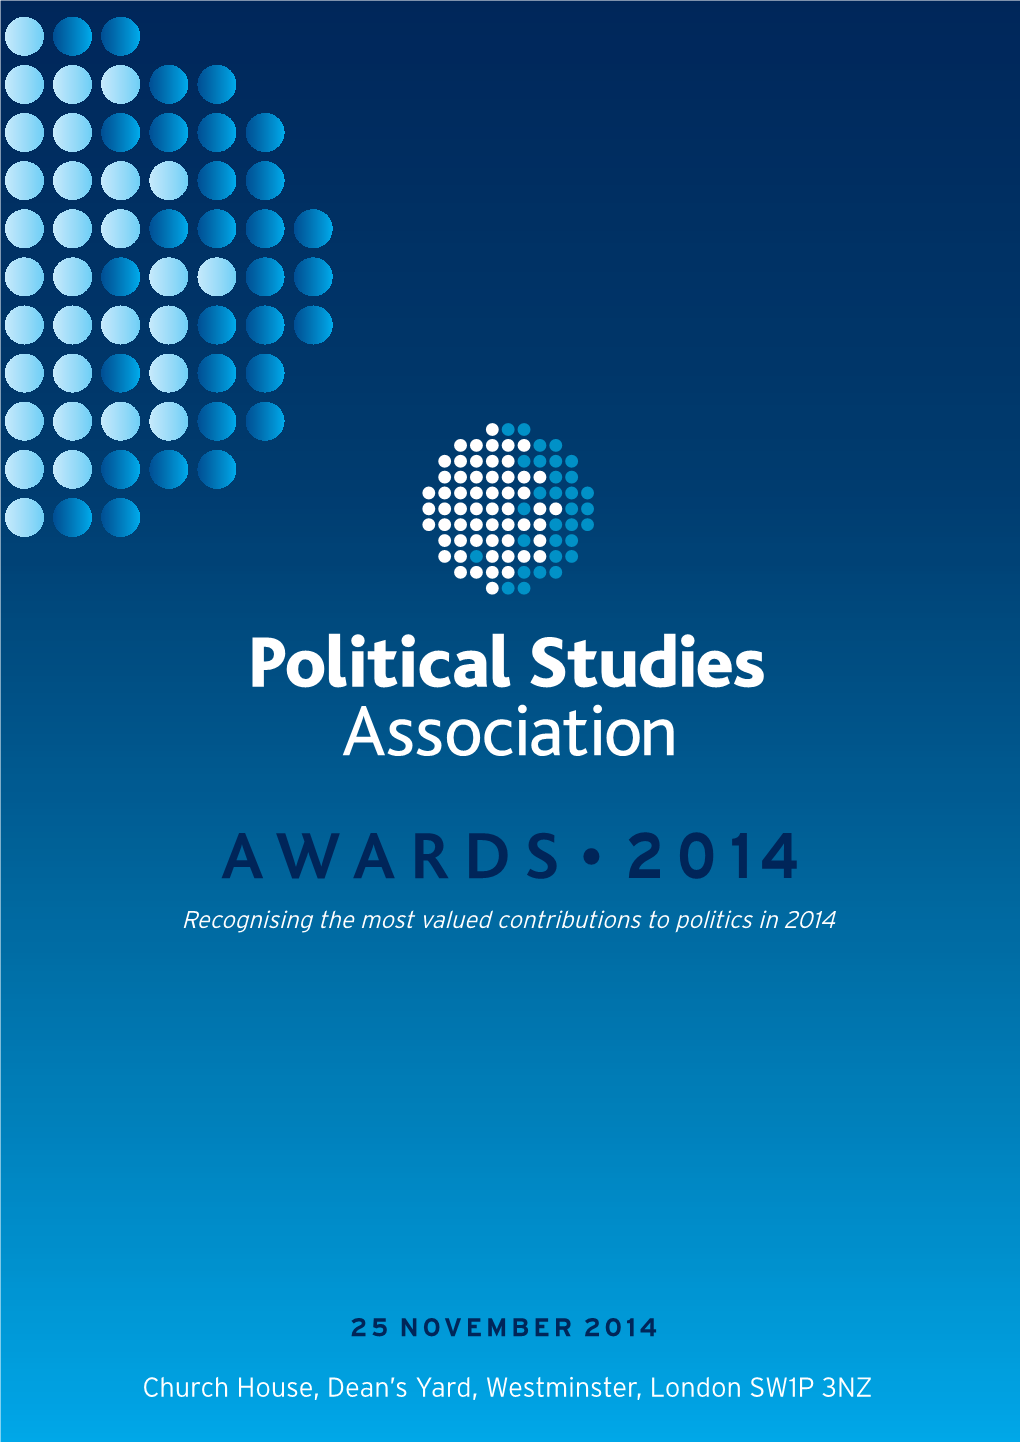 Download the PSA Awards 2014 Programme